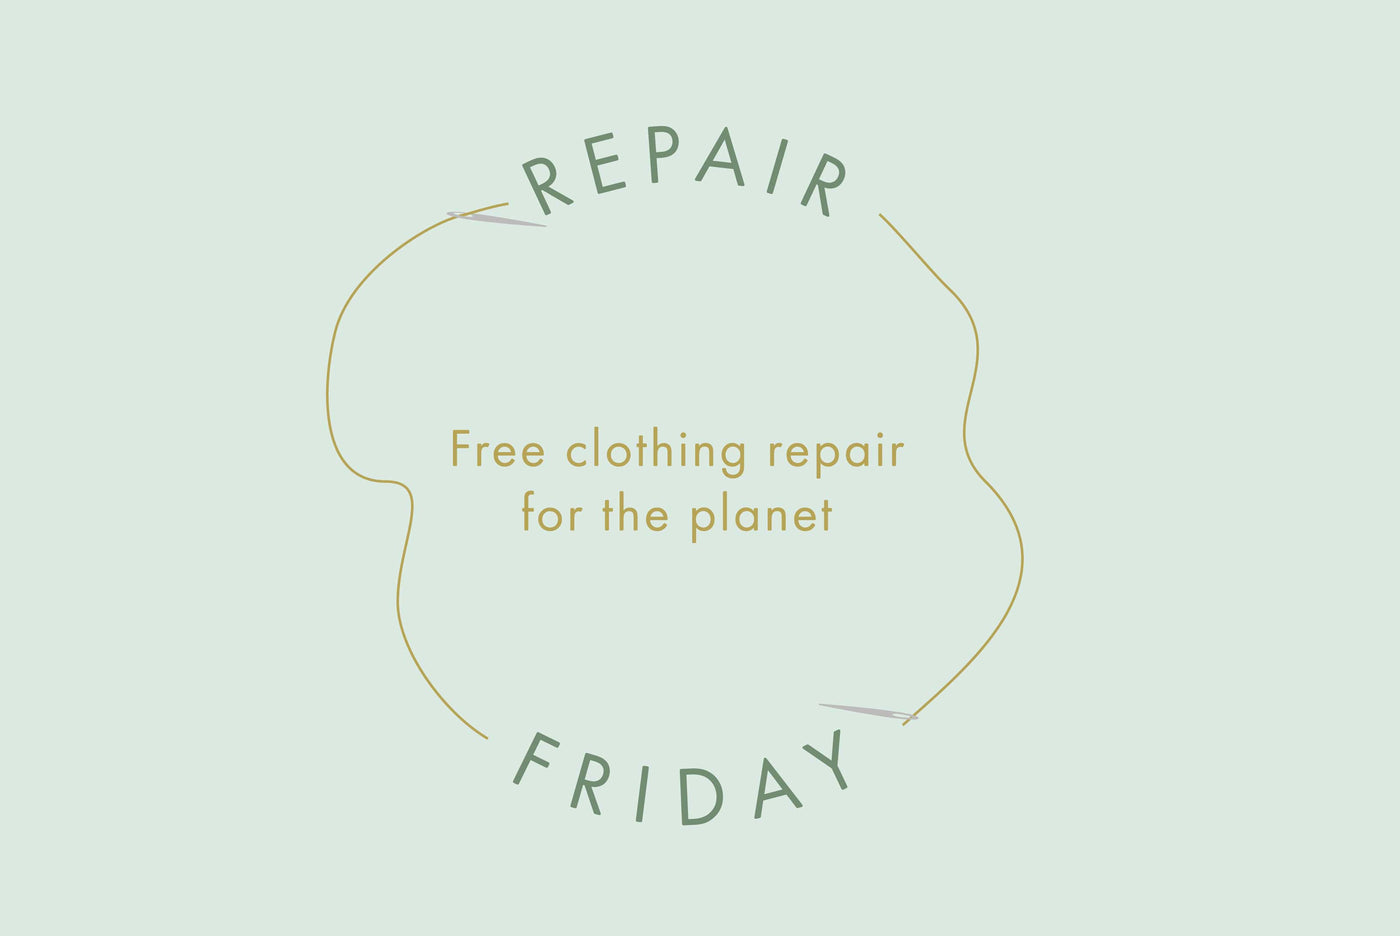 #repairfridaytwinandchic - Free clothing repair for our planet